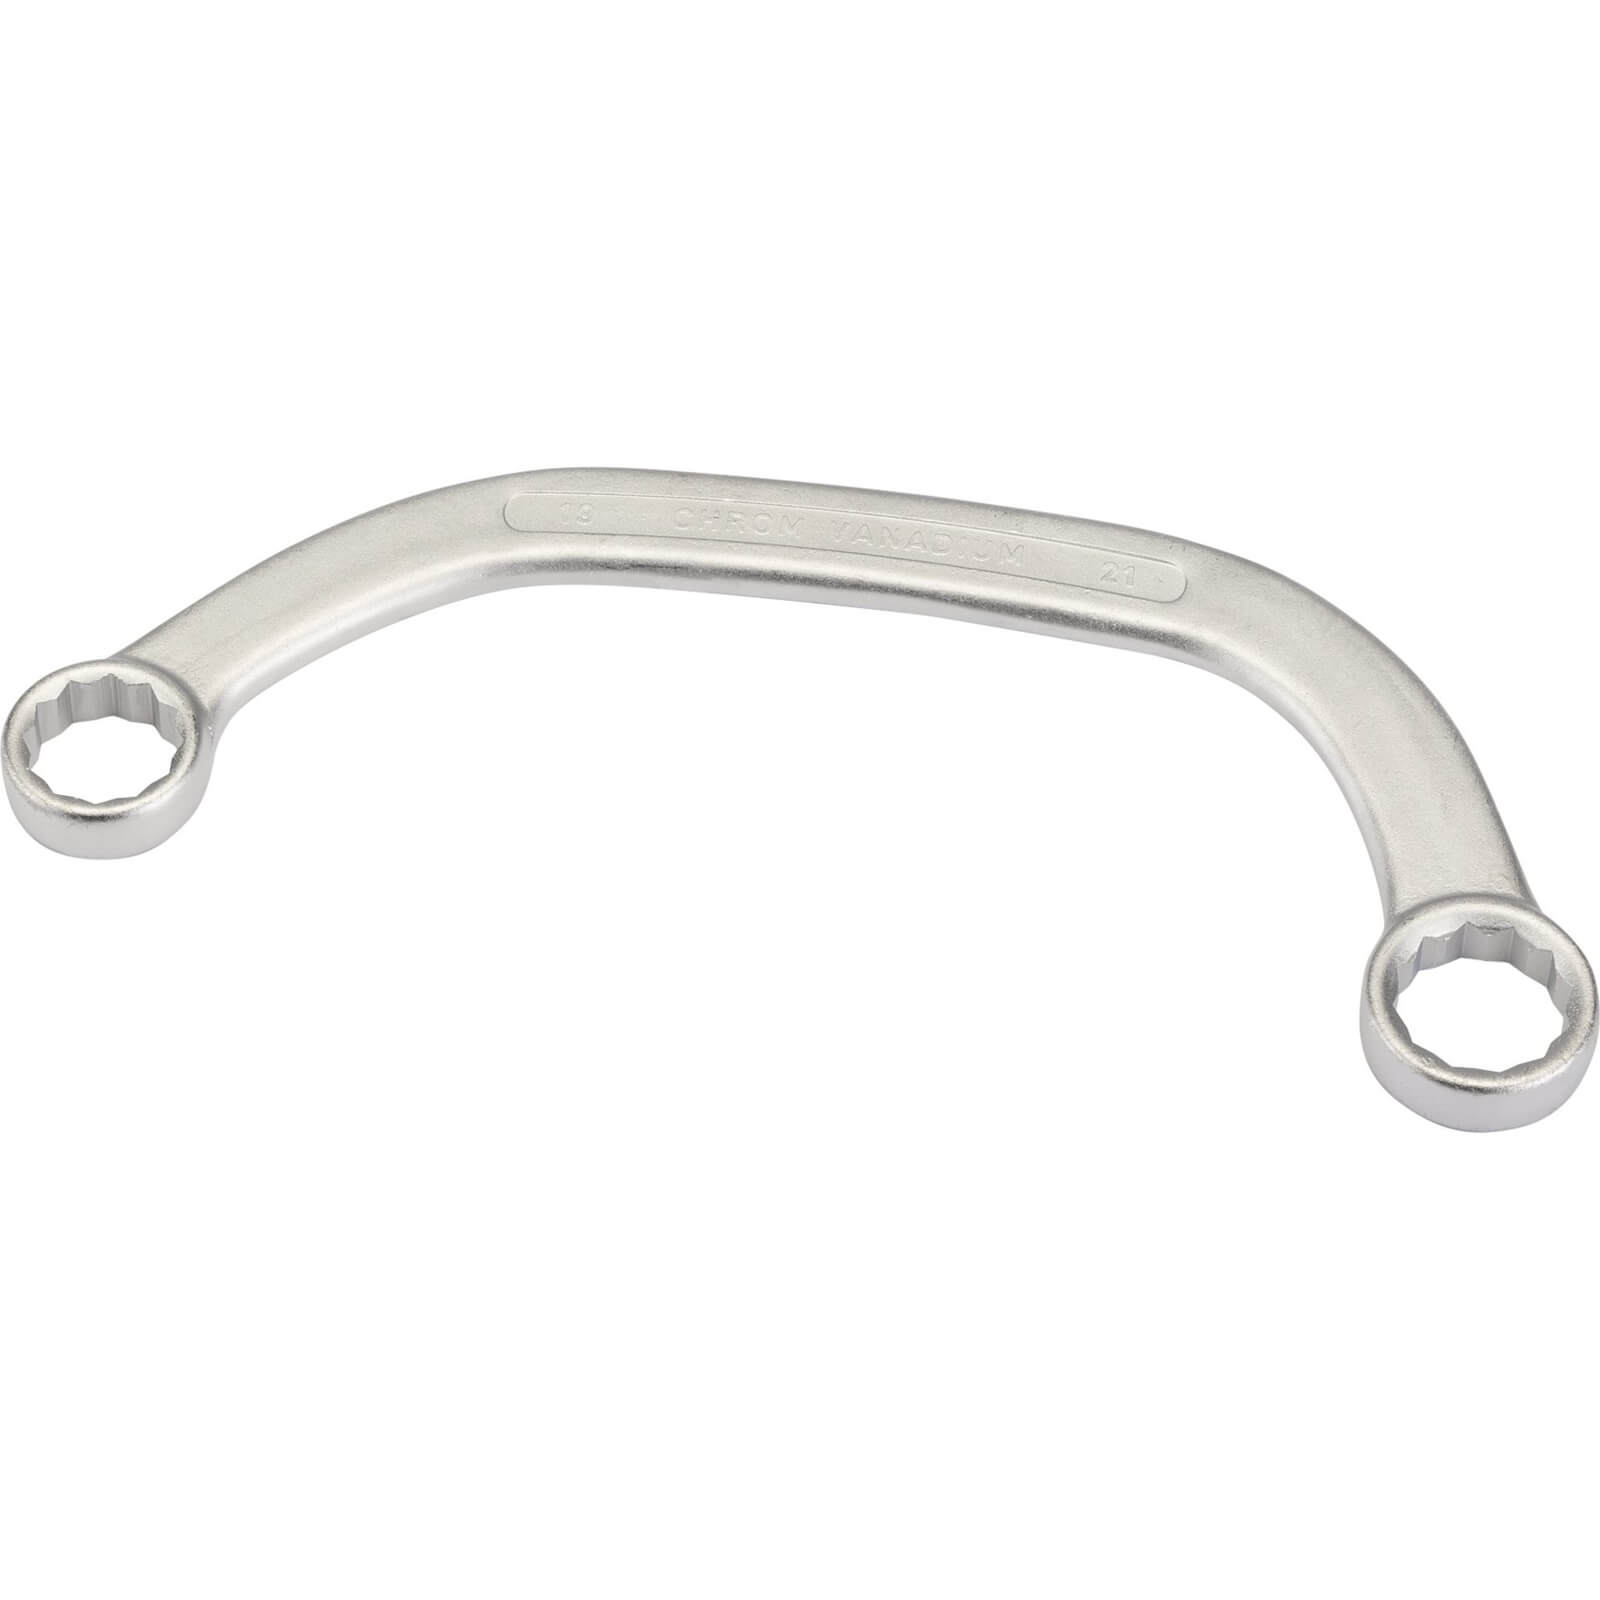 Photo of Elora Obstruction Ring Spanner 19mm X 21mm